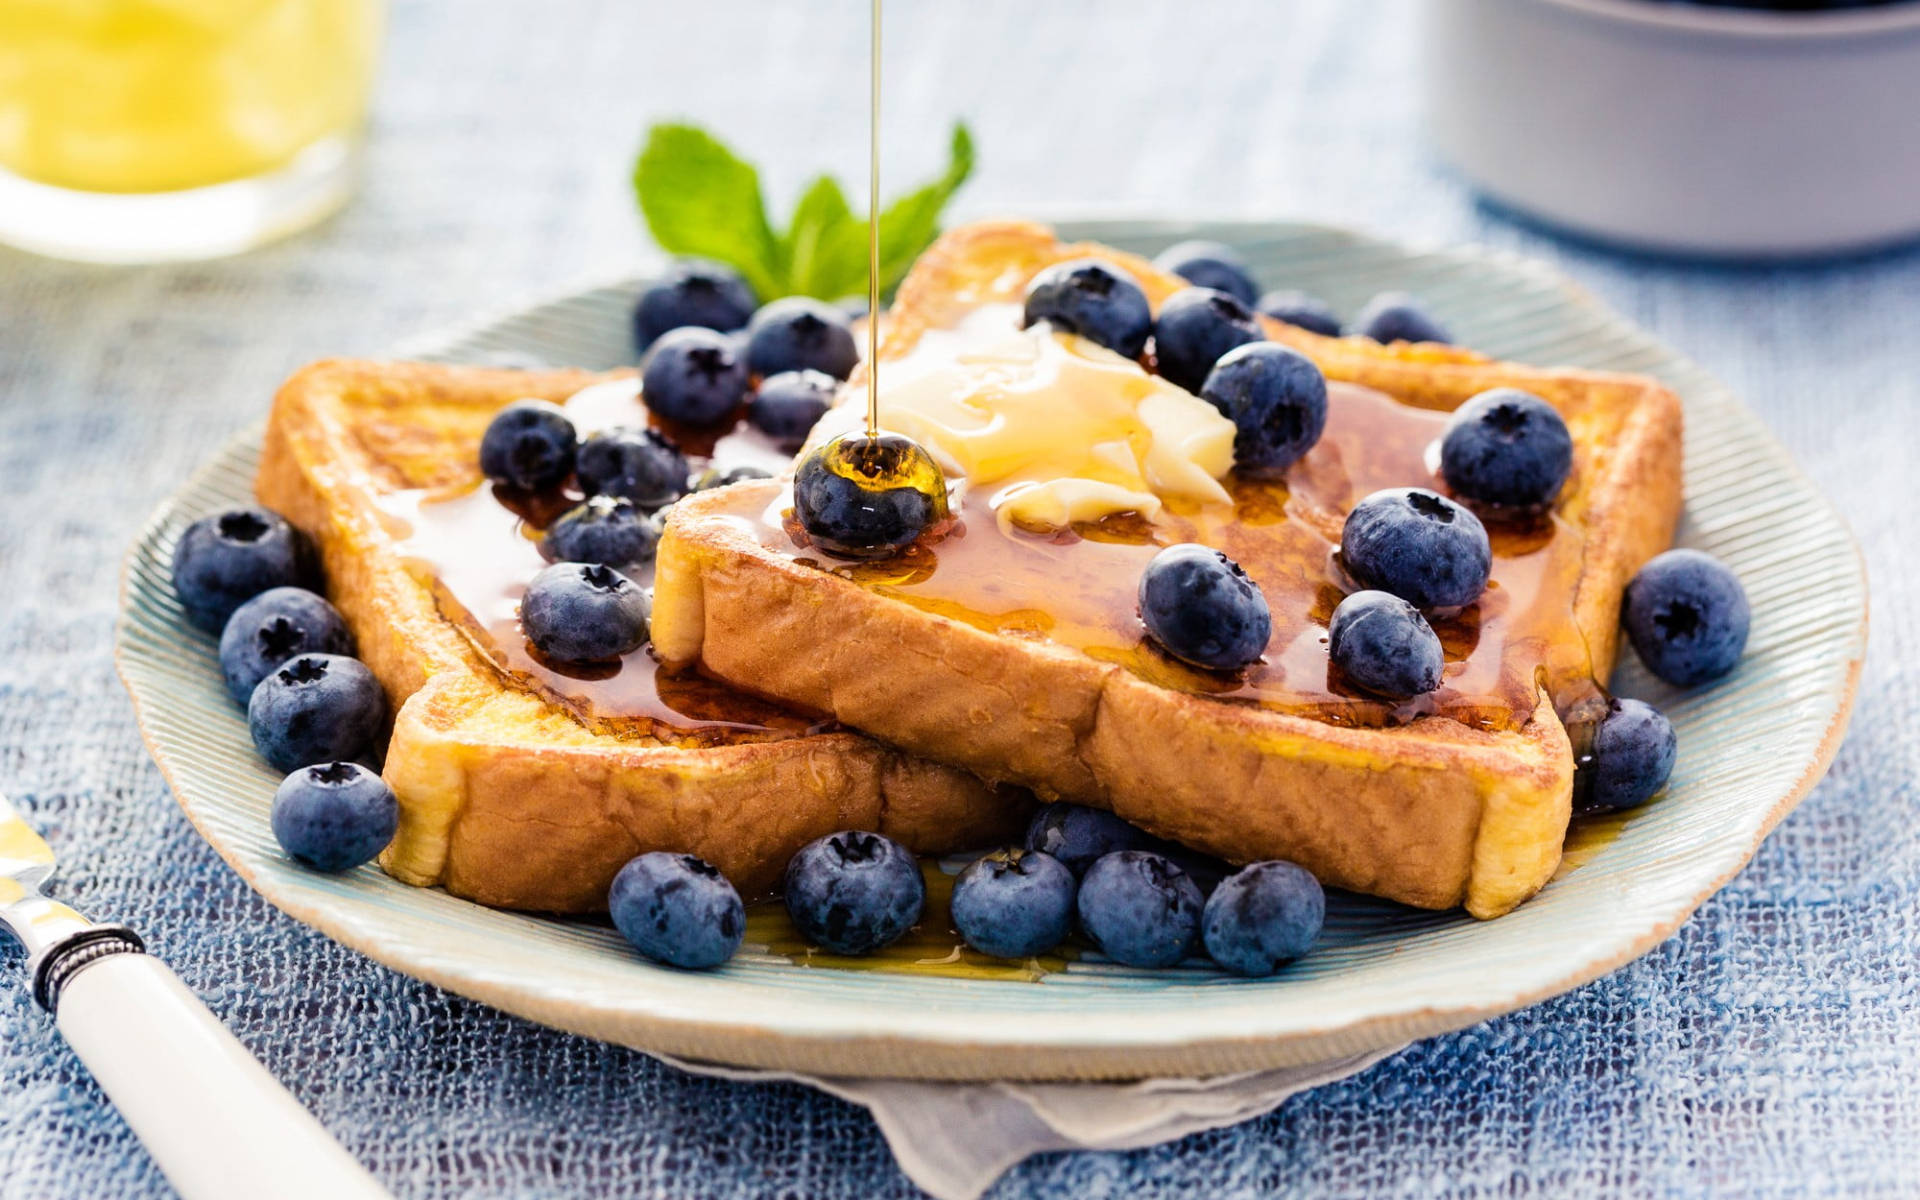 Toasted Bread With Berries